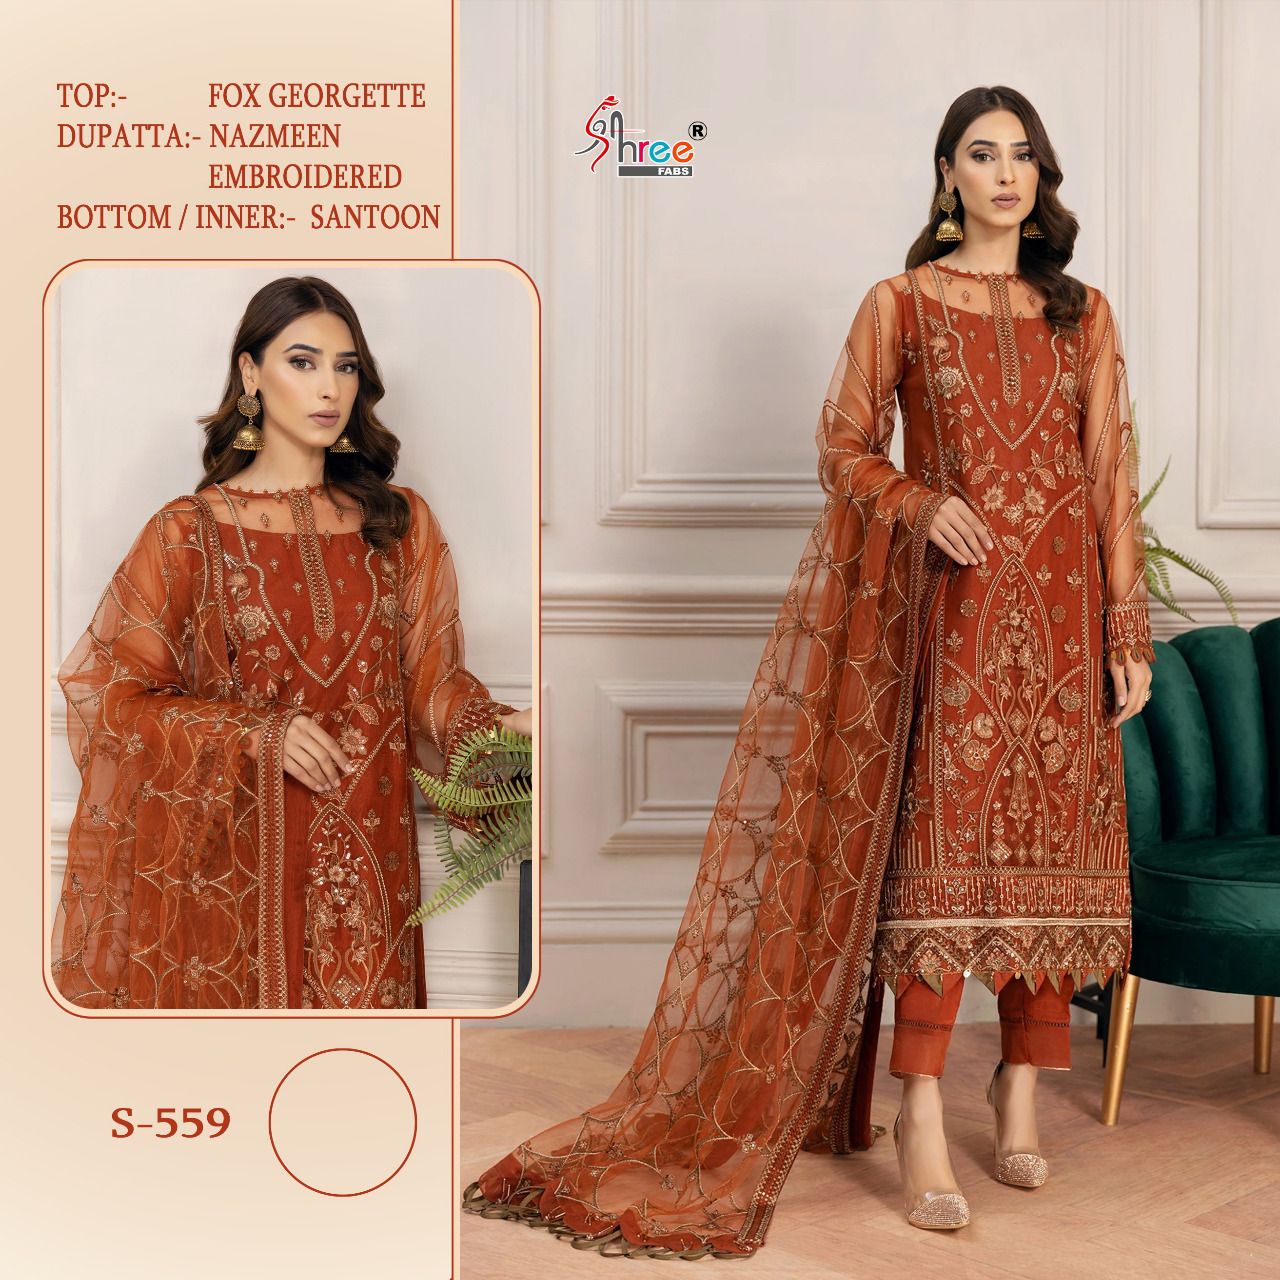 SHREE FABS S 559 PAKISTANI SUITS IN INDIA